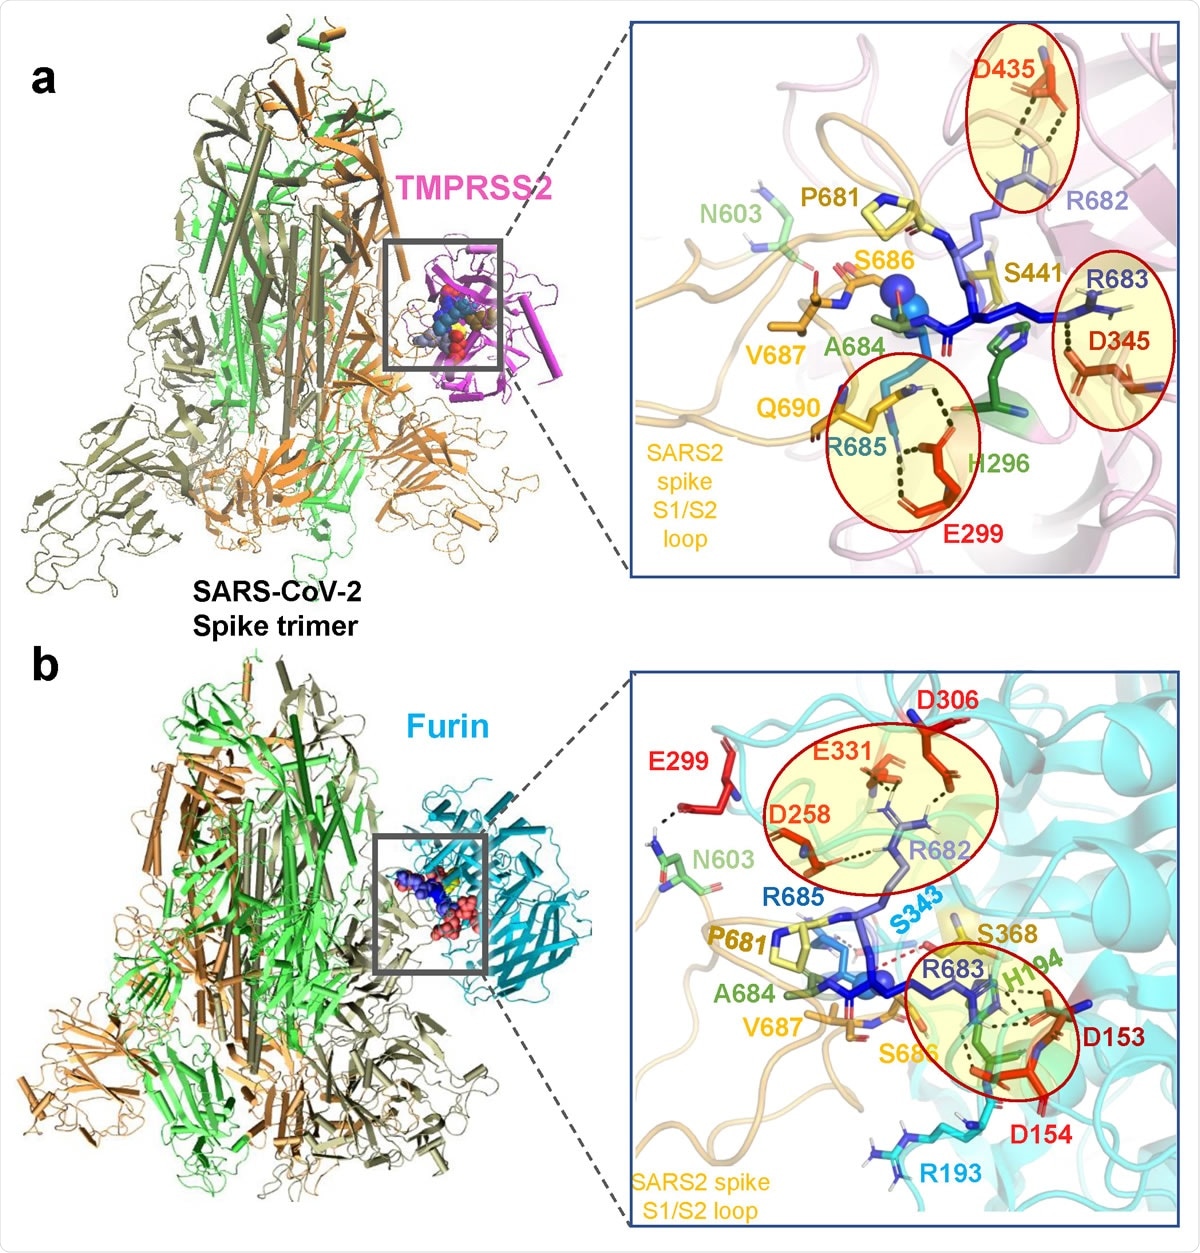 Binding poses of human proteases TMPRSS2 and furin to SARS-CoV-2 S protein. (a-b) Structural models for the SARS-CoV-2 S protein complexed with TMPRSS2 (a), and furin (b), obtained from docking simulations followed by refinements. An overview (left) and a zoomed in view (right) are shown in each case. The arginines in the S1/S2 loop P681RRARS686 are shown in different shades of blue, and their interaction partner (acidic residues) in the proteases are shown in red. Spheres (right panels) highlight the peptide bond that would be cleaved (between R685 and S686). TMPRSS2 catalytic triad residues are in yellow for S441, green for H296, and dark red for D345. Their counterparts in furin are S368, H194 and D153. Note the short distance between the carbonyl carbon from R685 and the hydroxyl oxygen of the catalytic serine S441 of TMPRSS2 (3.5 Å) or S368 of furin (3.1 Å). Black dashed lines show the interfacial polar contacts and salt bridges, and those including the S1/S2 loop arginines are highlighted by ellipses.